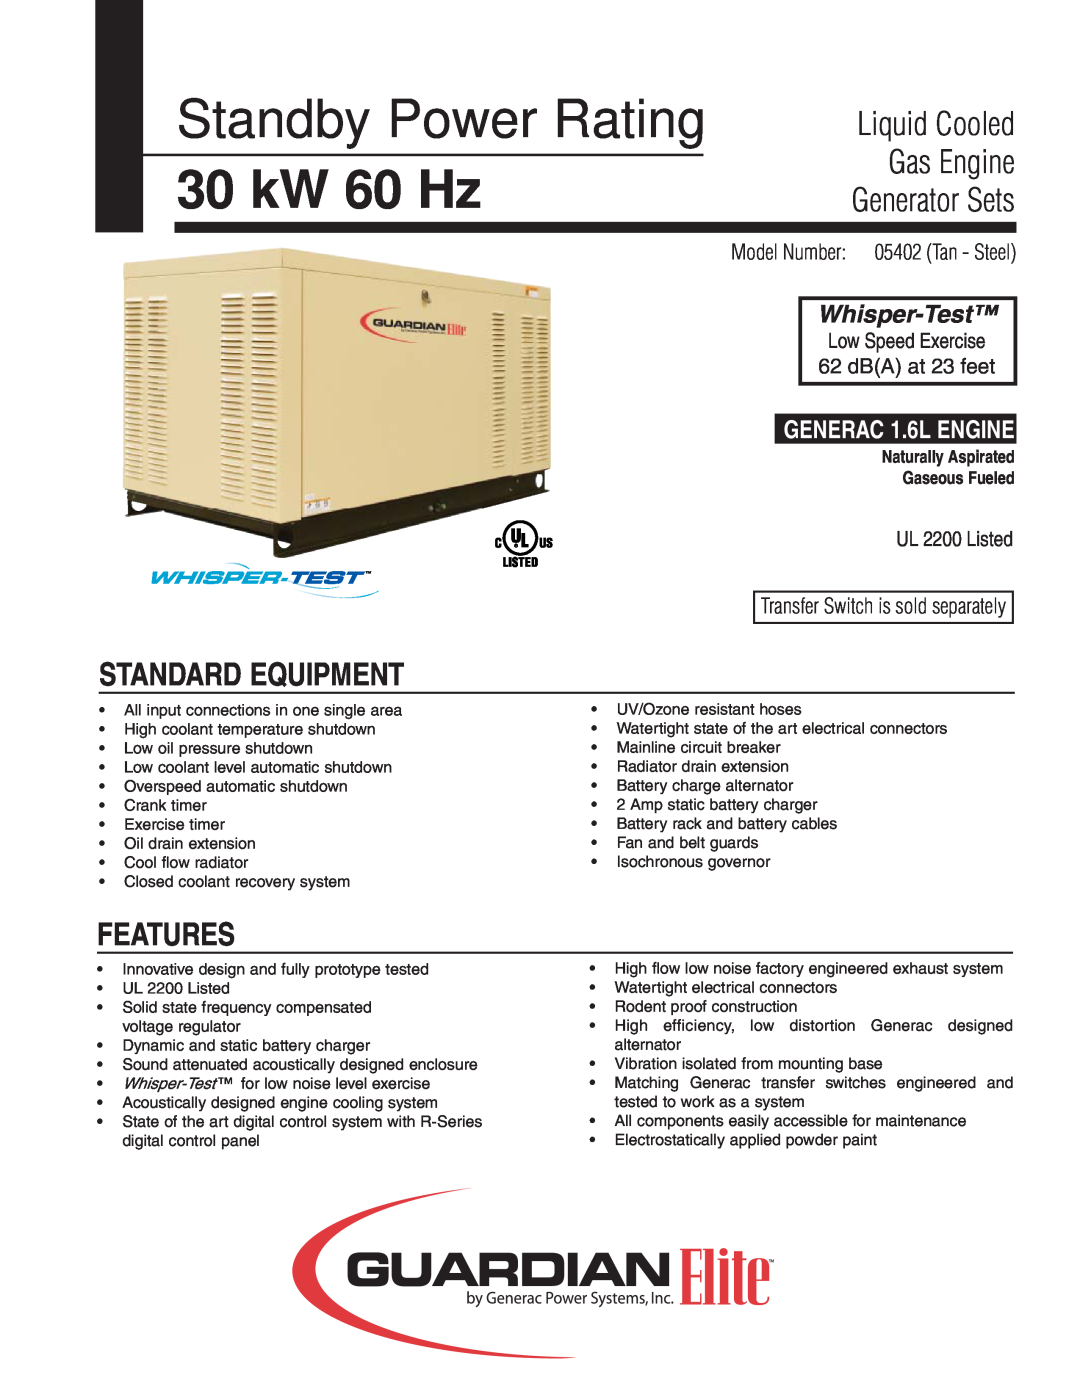 Generac Power Systems 05402 manual Standard Equipment, Features, Naturally Aspirated, Gaseous Fueled, Standby Power Rating 